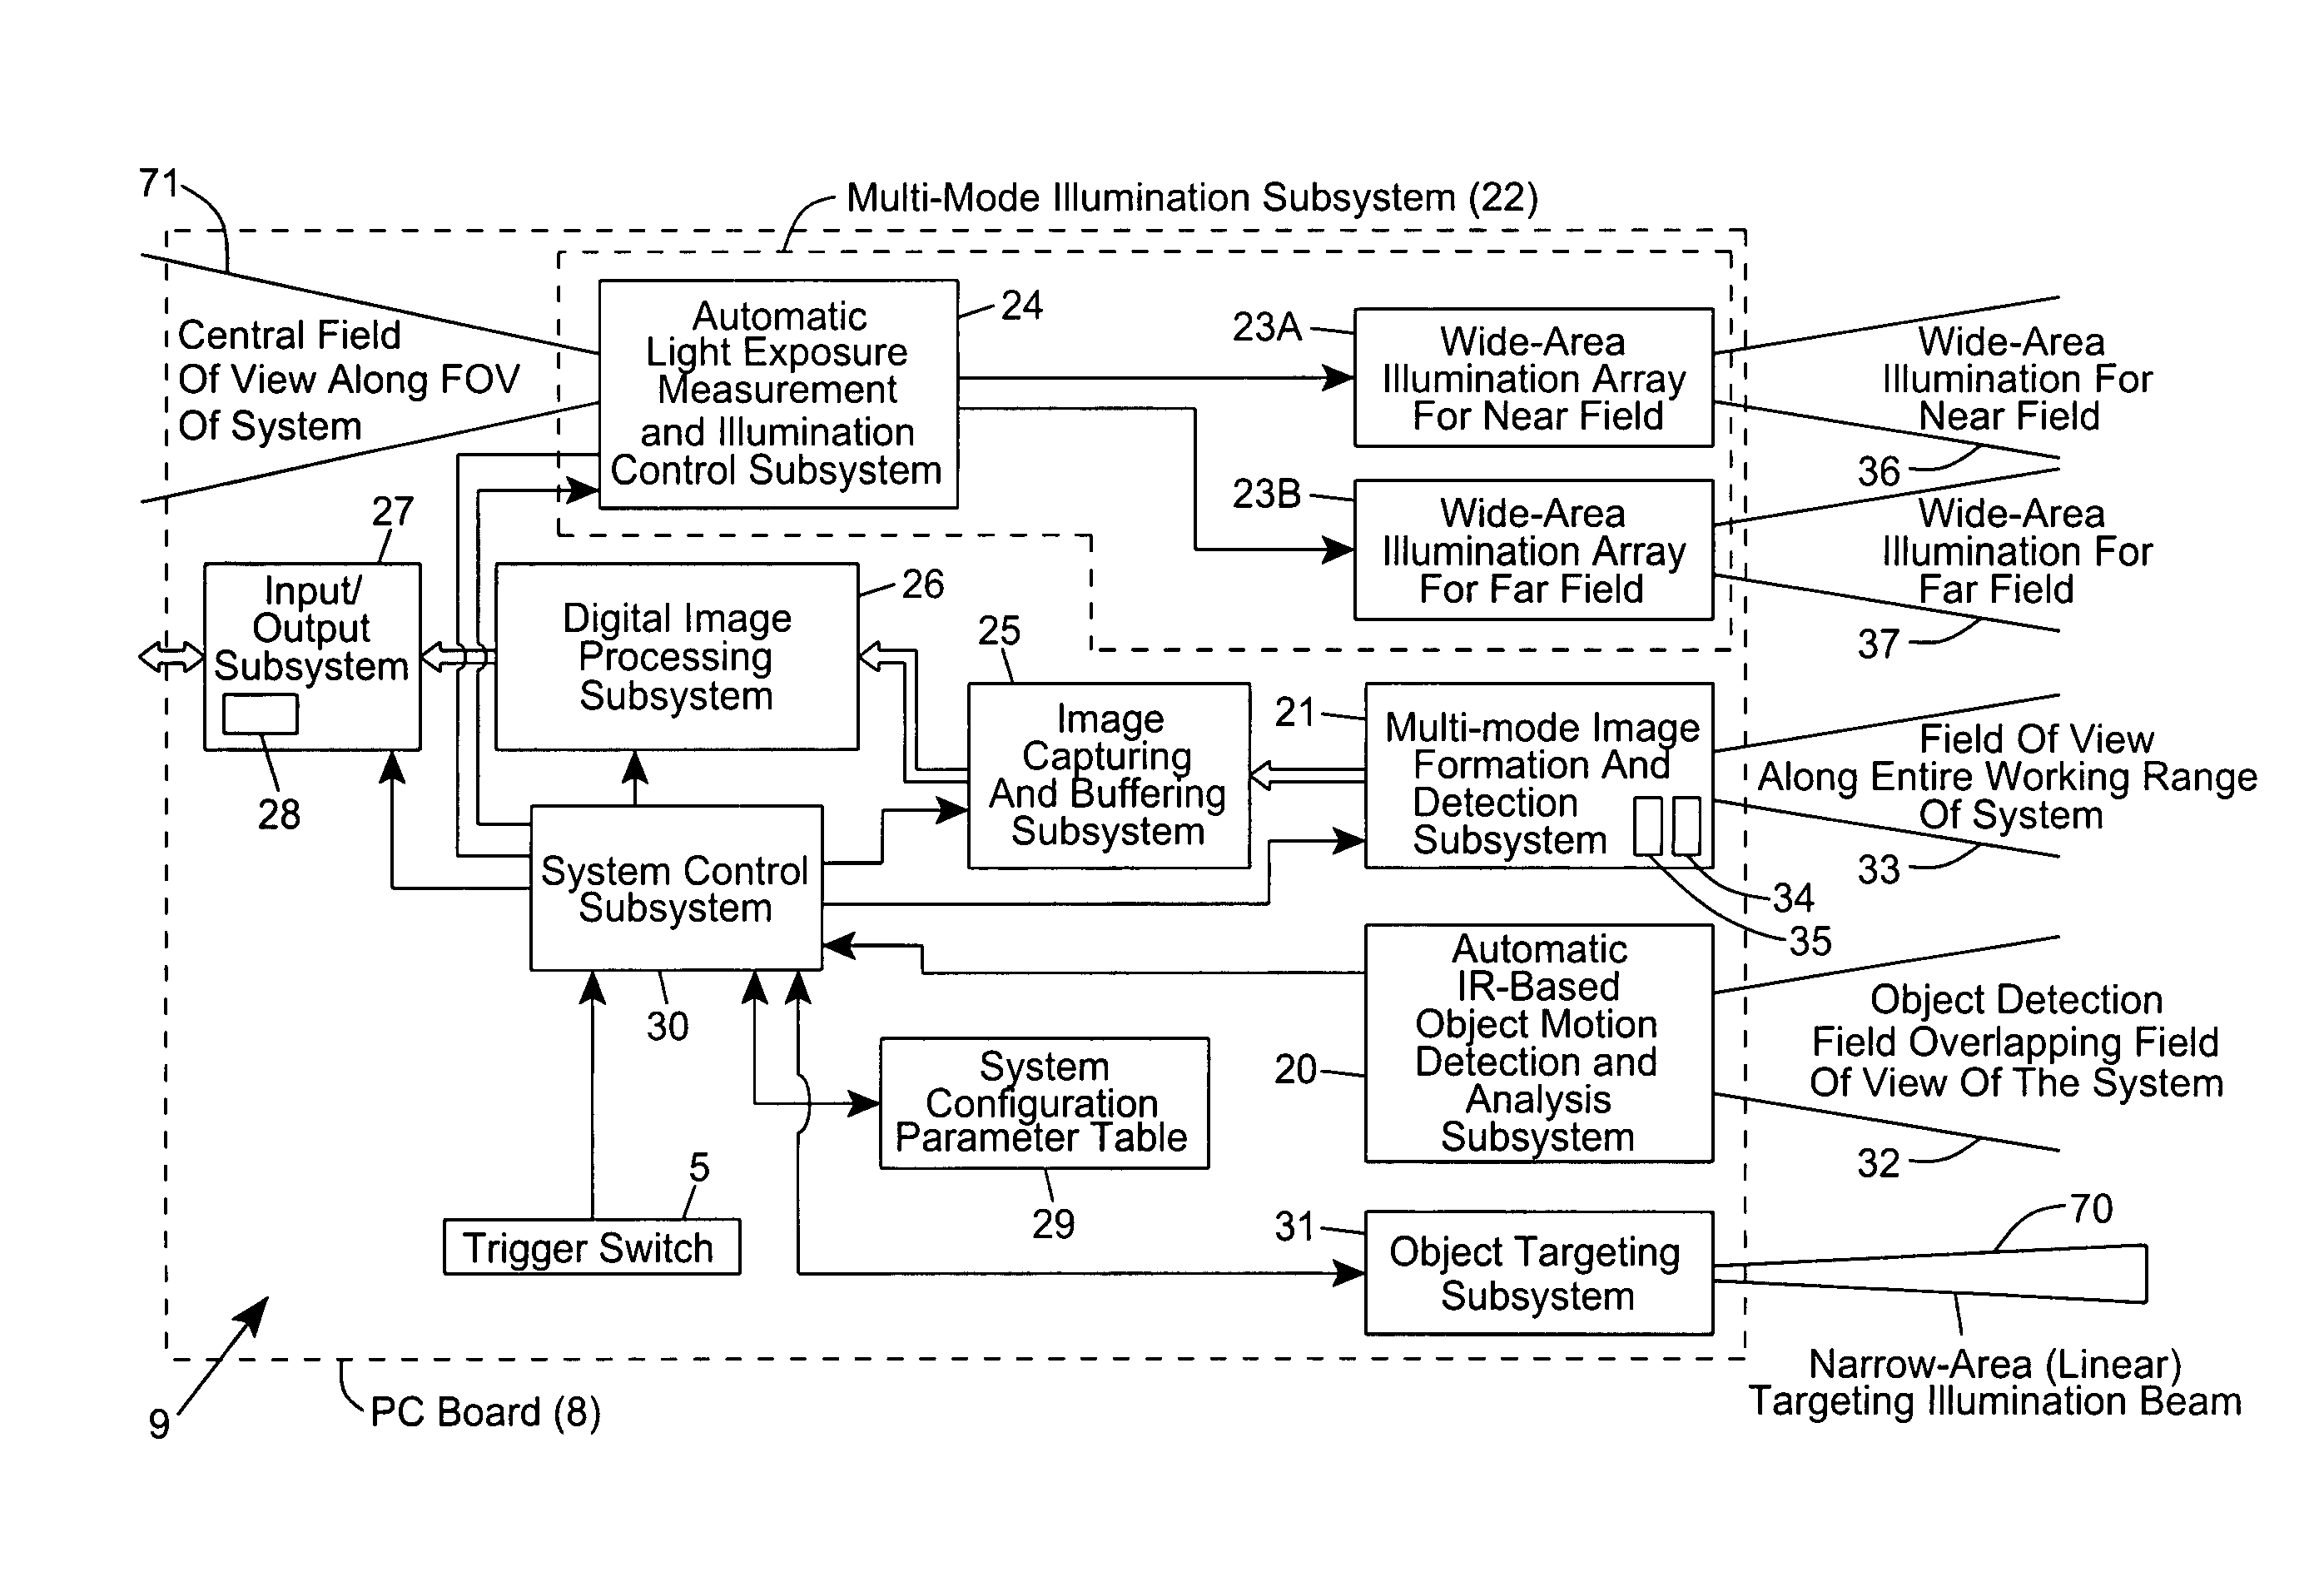 Method of blocking a portion of illumination rays generated by a countertop-supported digital imaging system, and preventing illumination rays from striking the eyes of the system operator or nearby consumer during operation of said countertop-supported digital image capture and processing system installed at a retail point of sale (POS) station